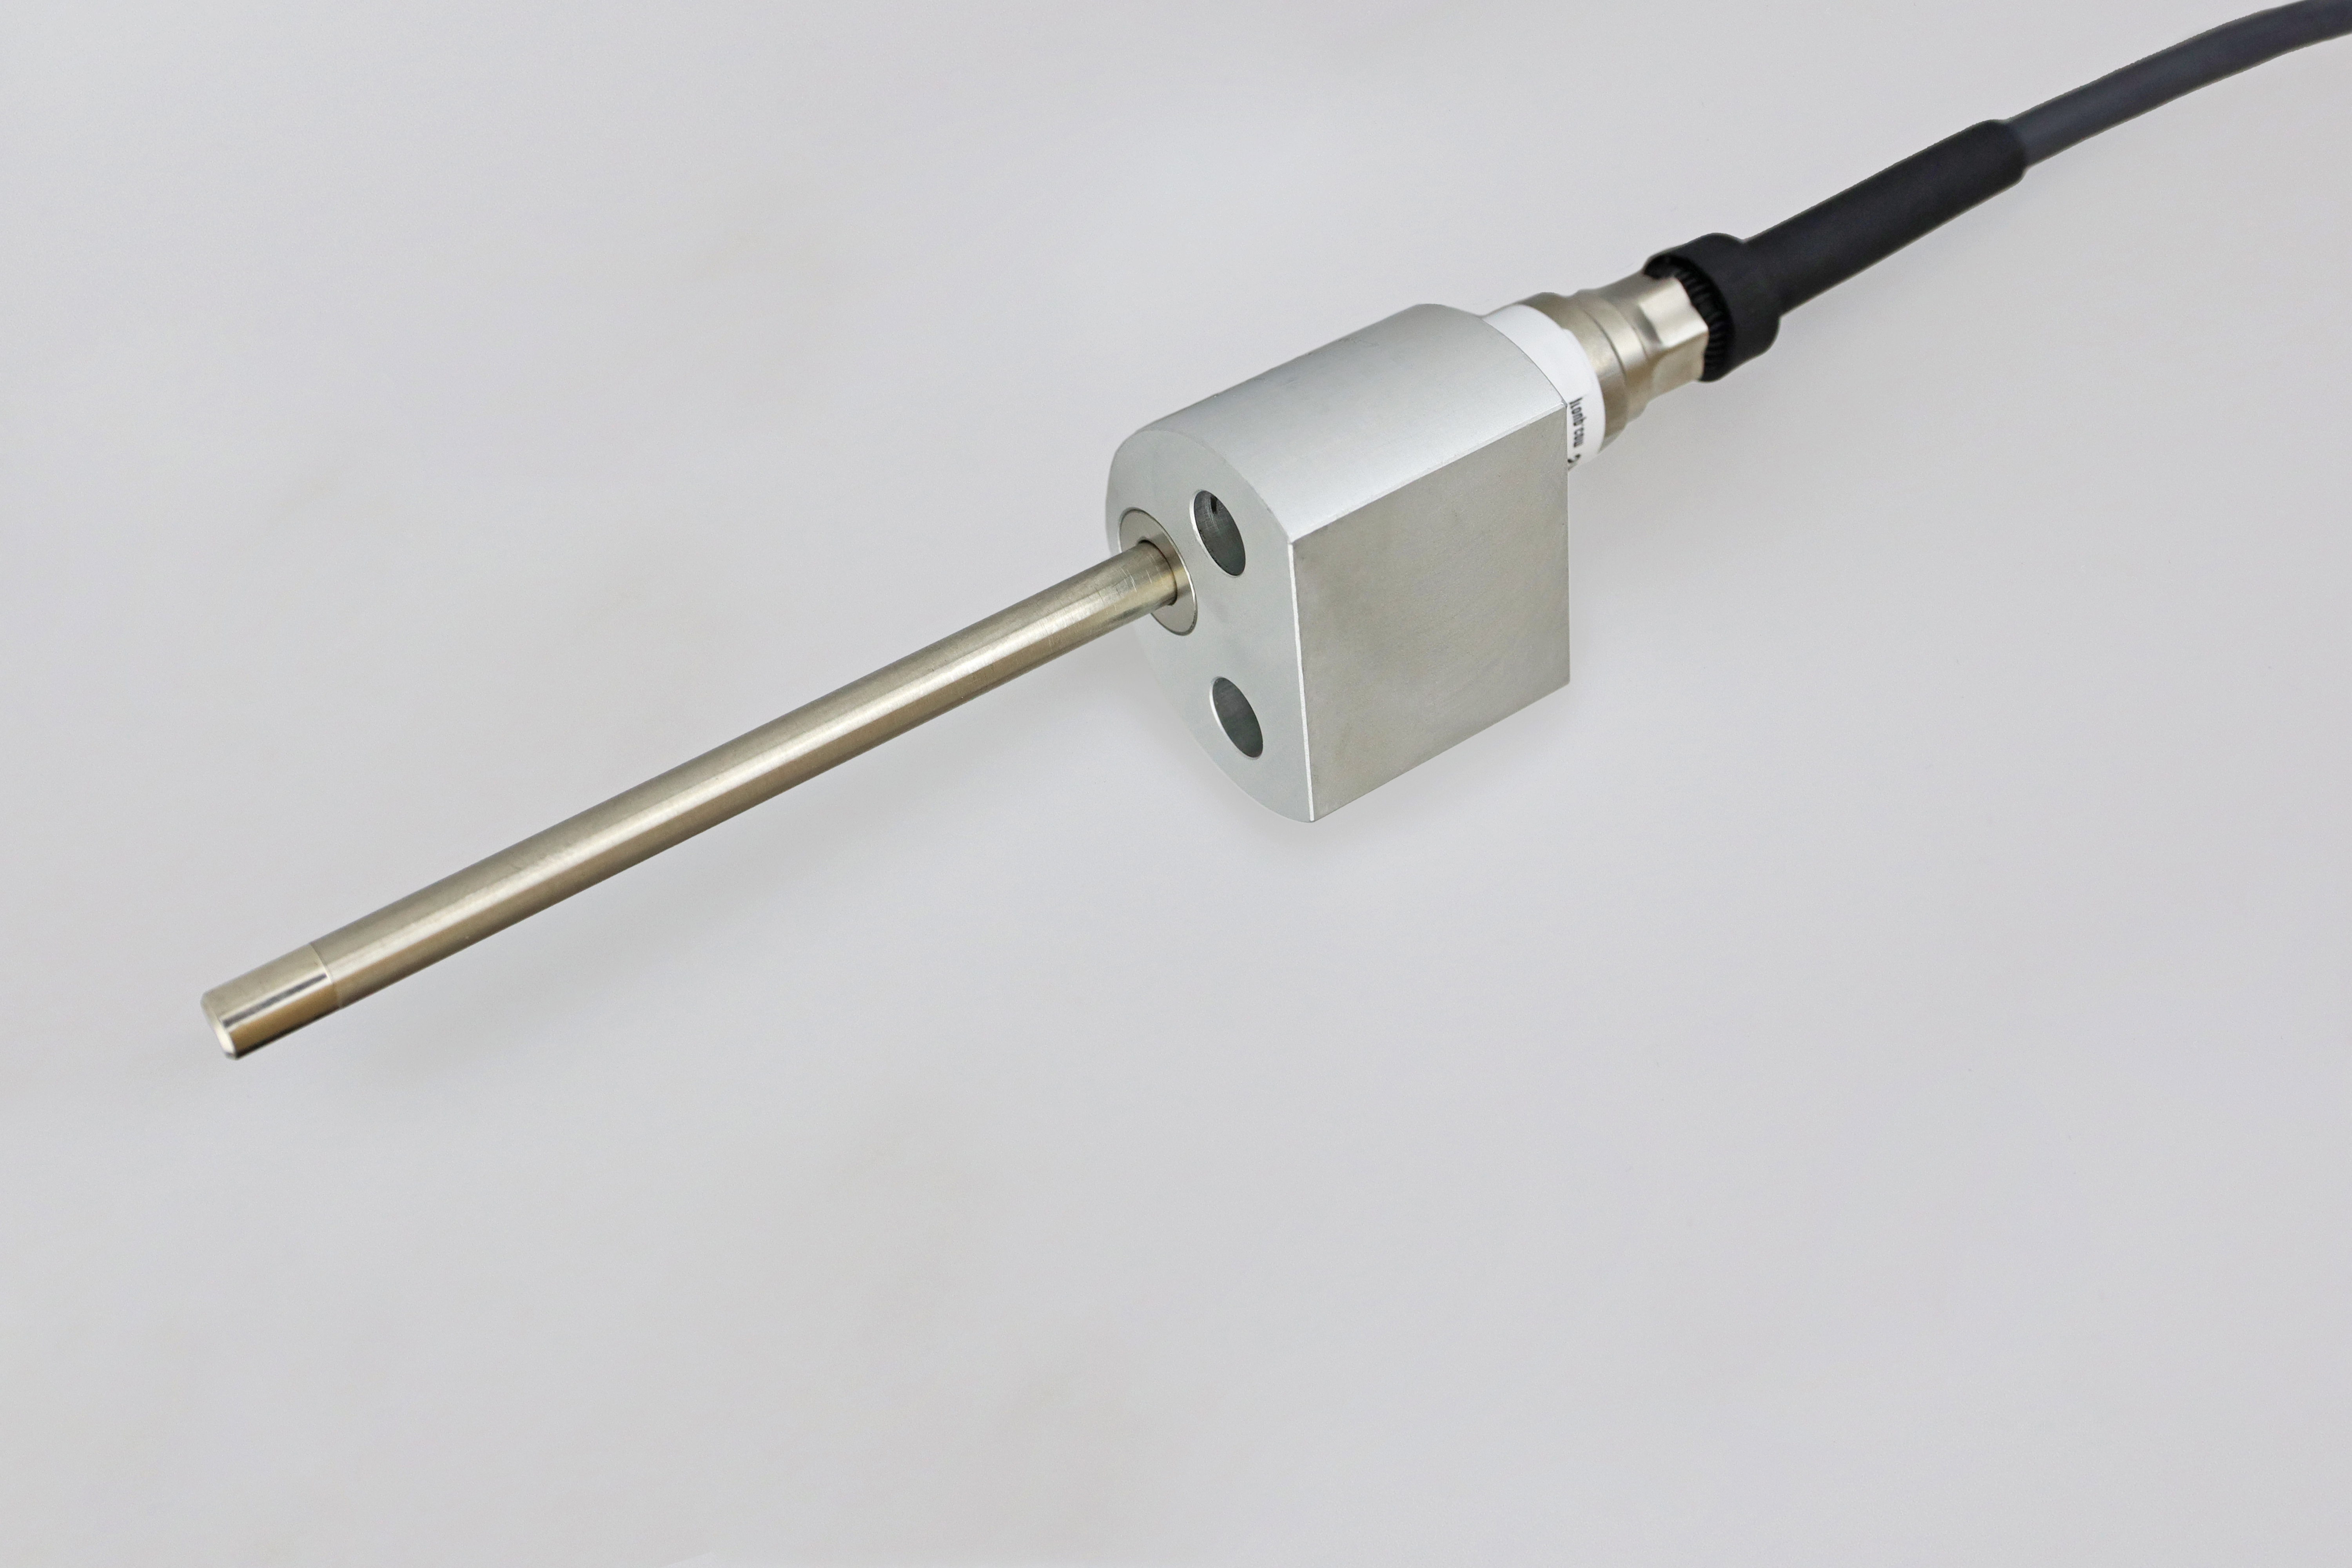 The image shows a TA18 temperature sensor laying on a grey background